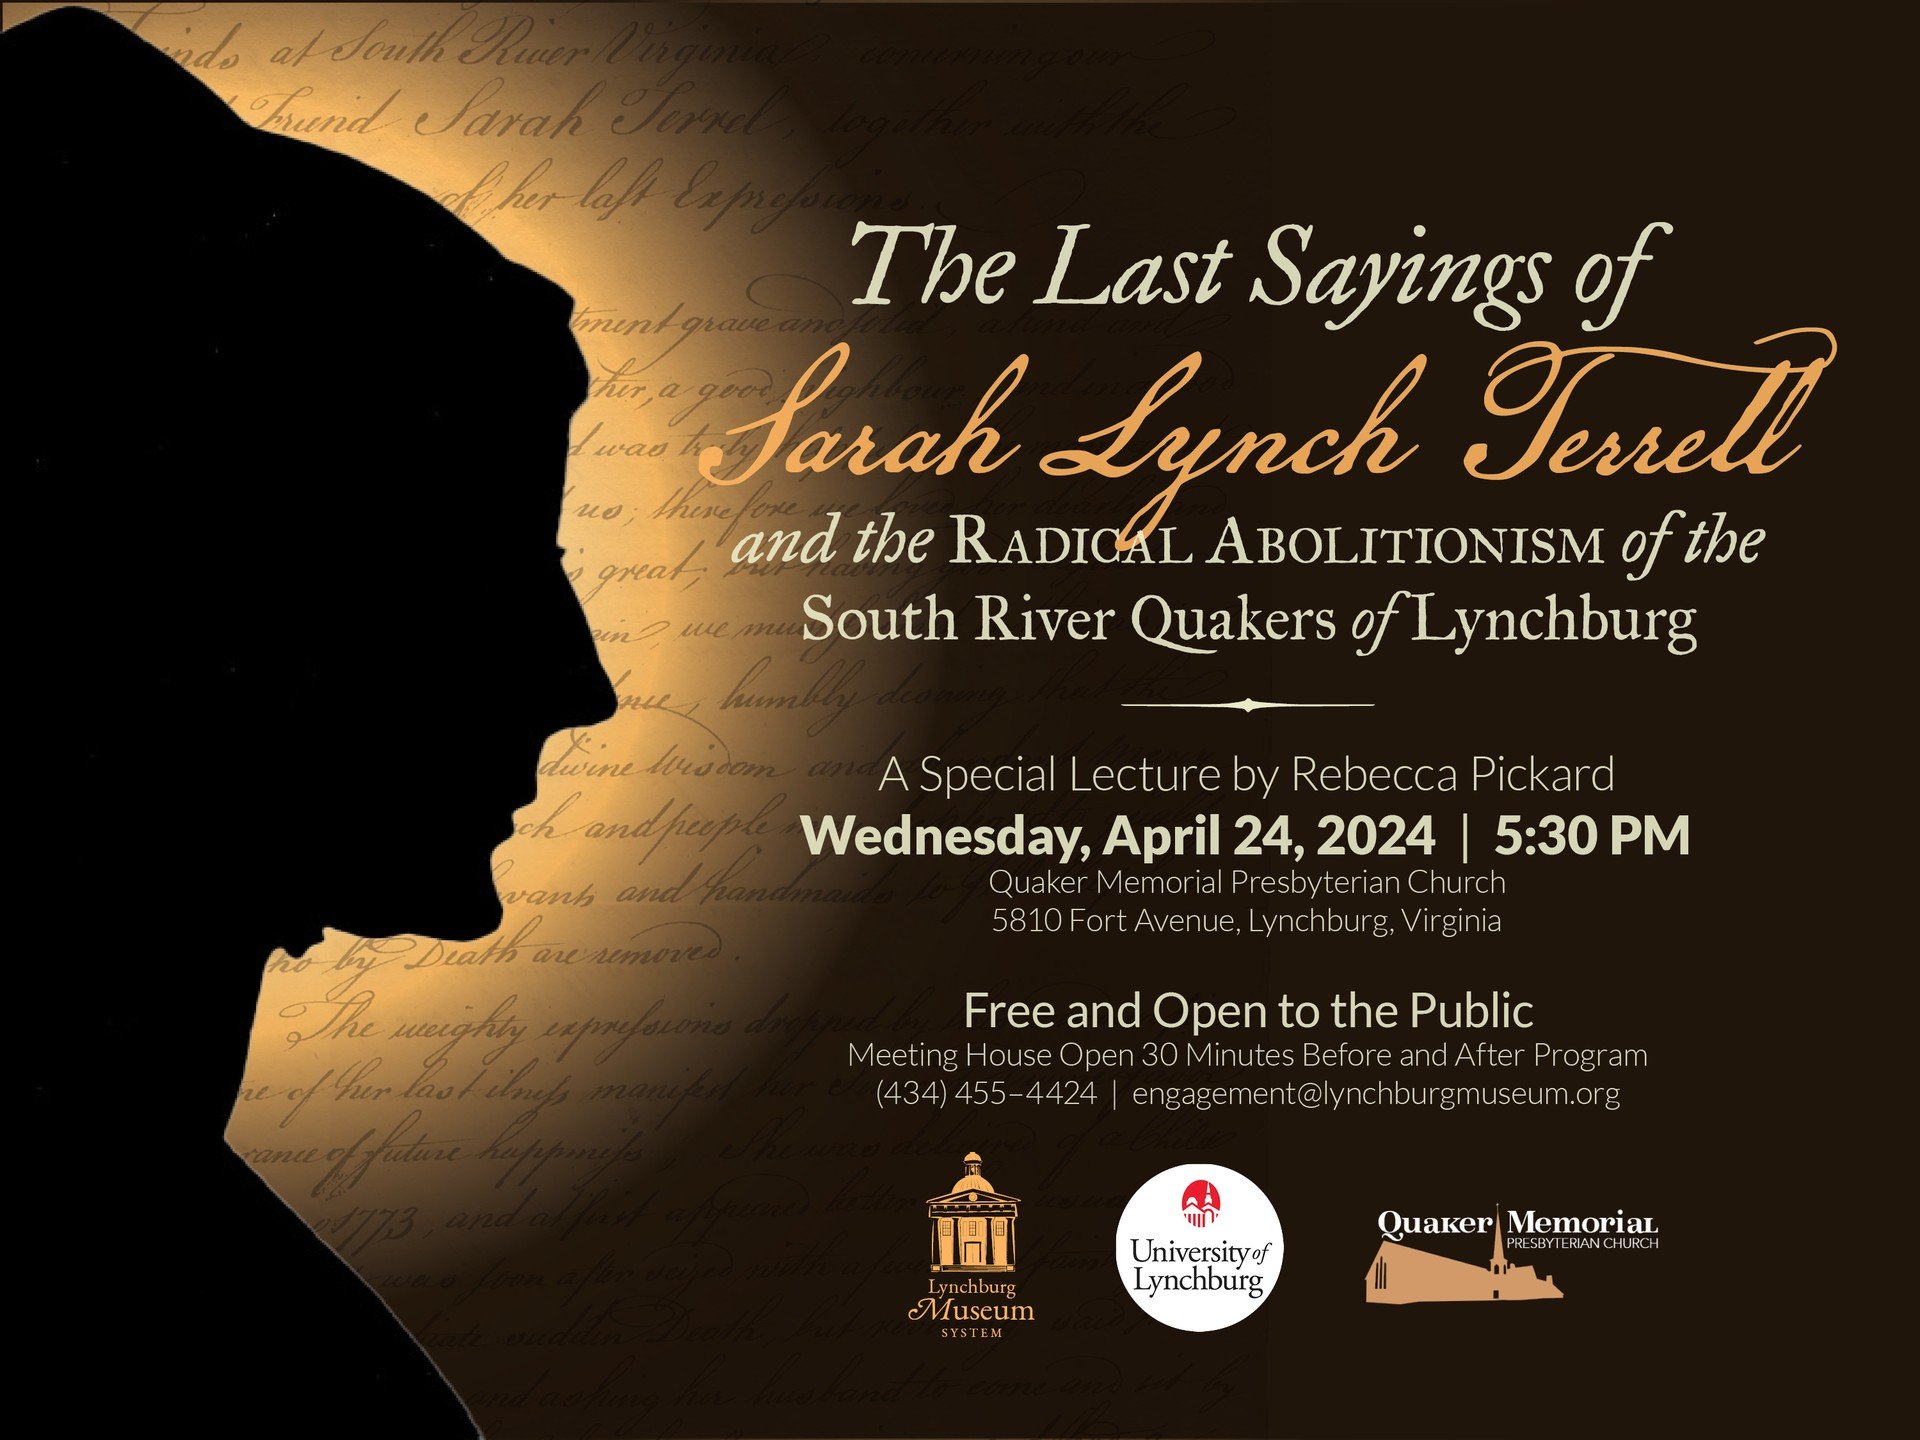 Please join us, tomorrow, Wednesday, April 24th at 5:30pm for an exciting illustrated lecture by scholar Rebecca Pickard, at Quaker Memorial Presbyterian Church.

This lecture will showcase the re-discovered &quot;Last Sayings of Sarah Lynch Terrell&